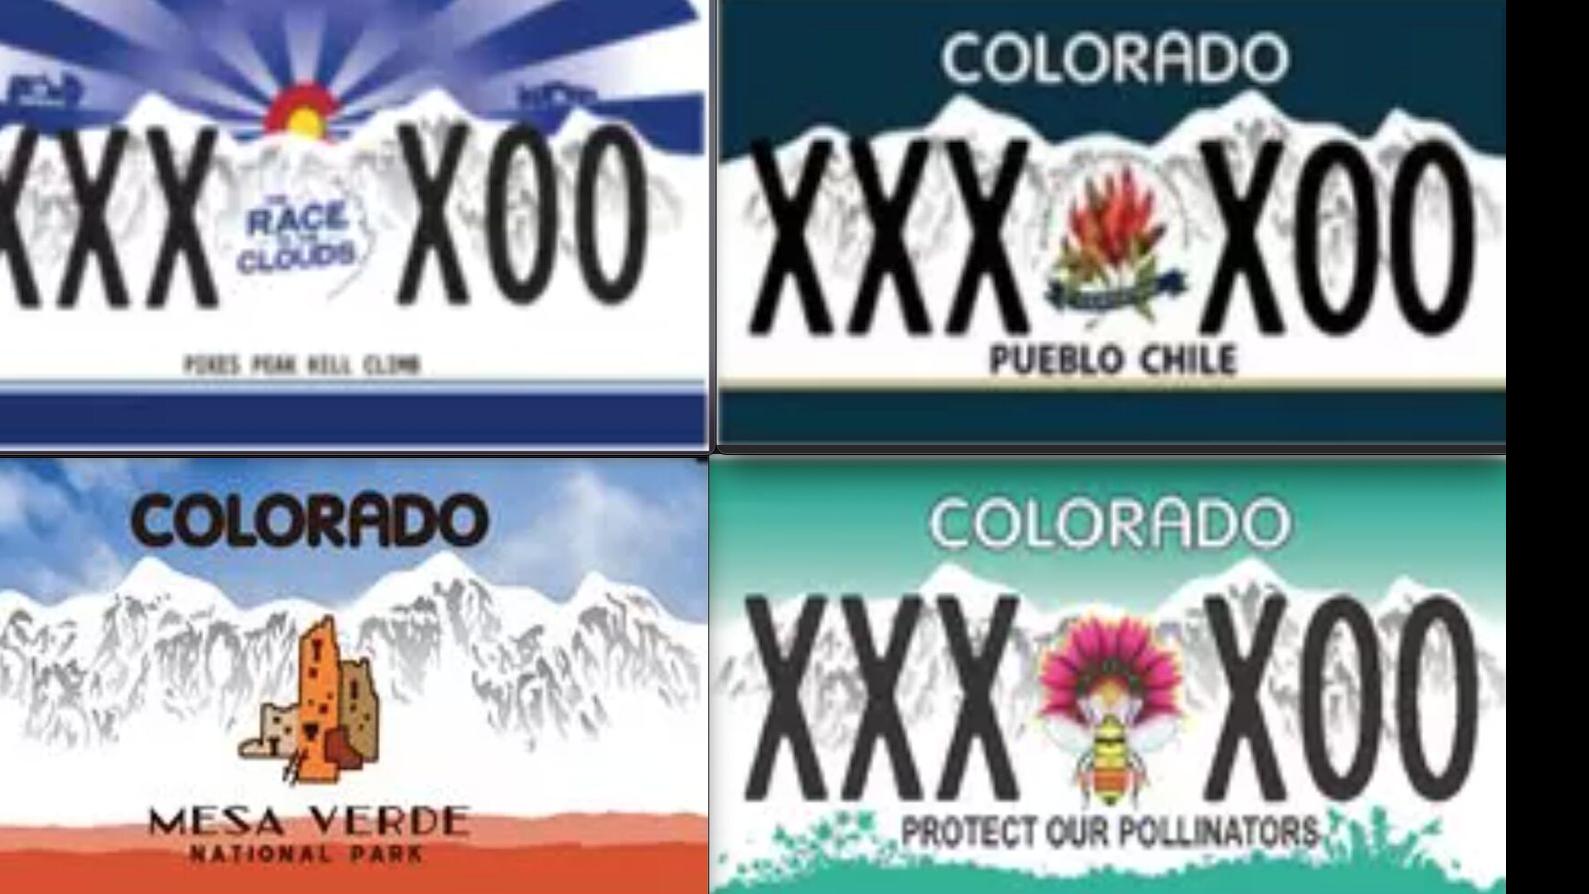 Specialty license plates: New system aims to save Colorado money